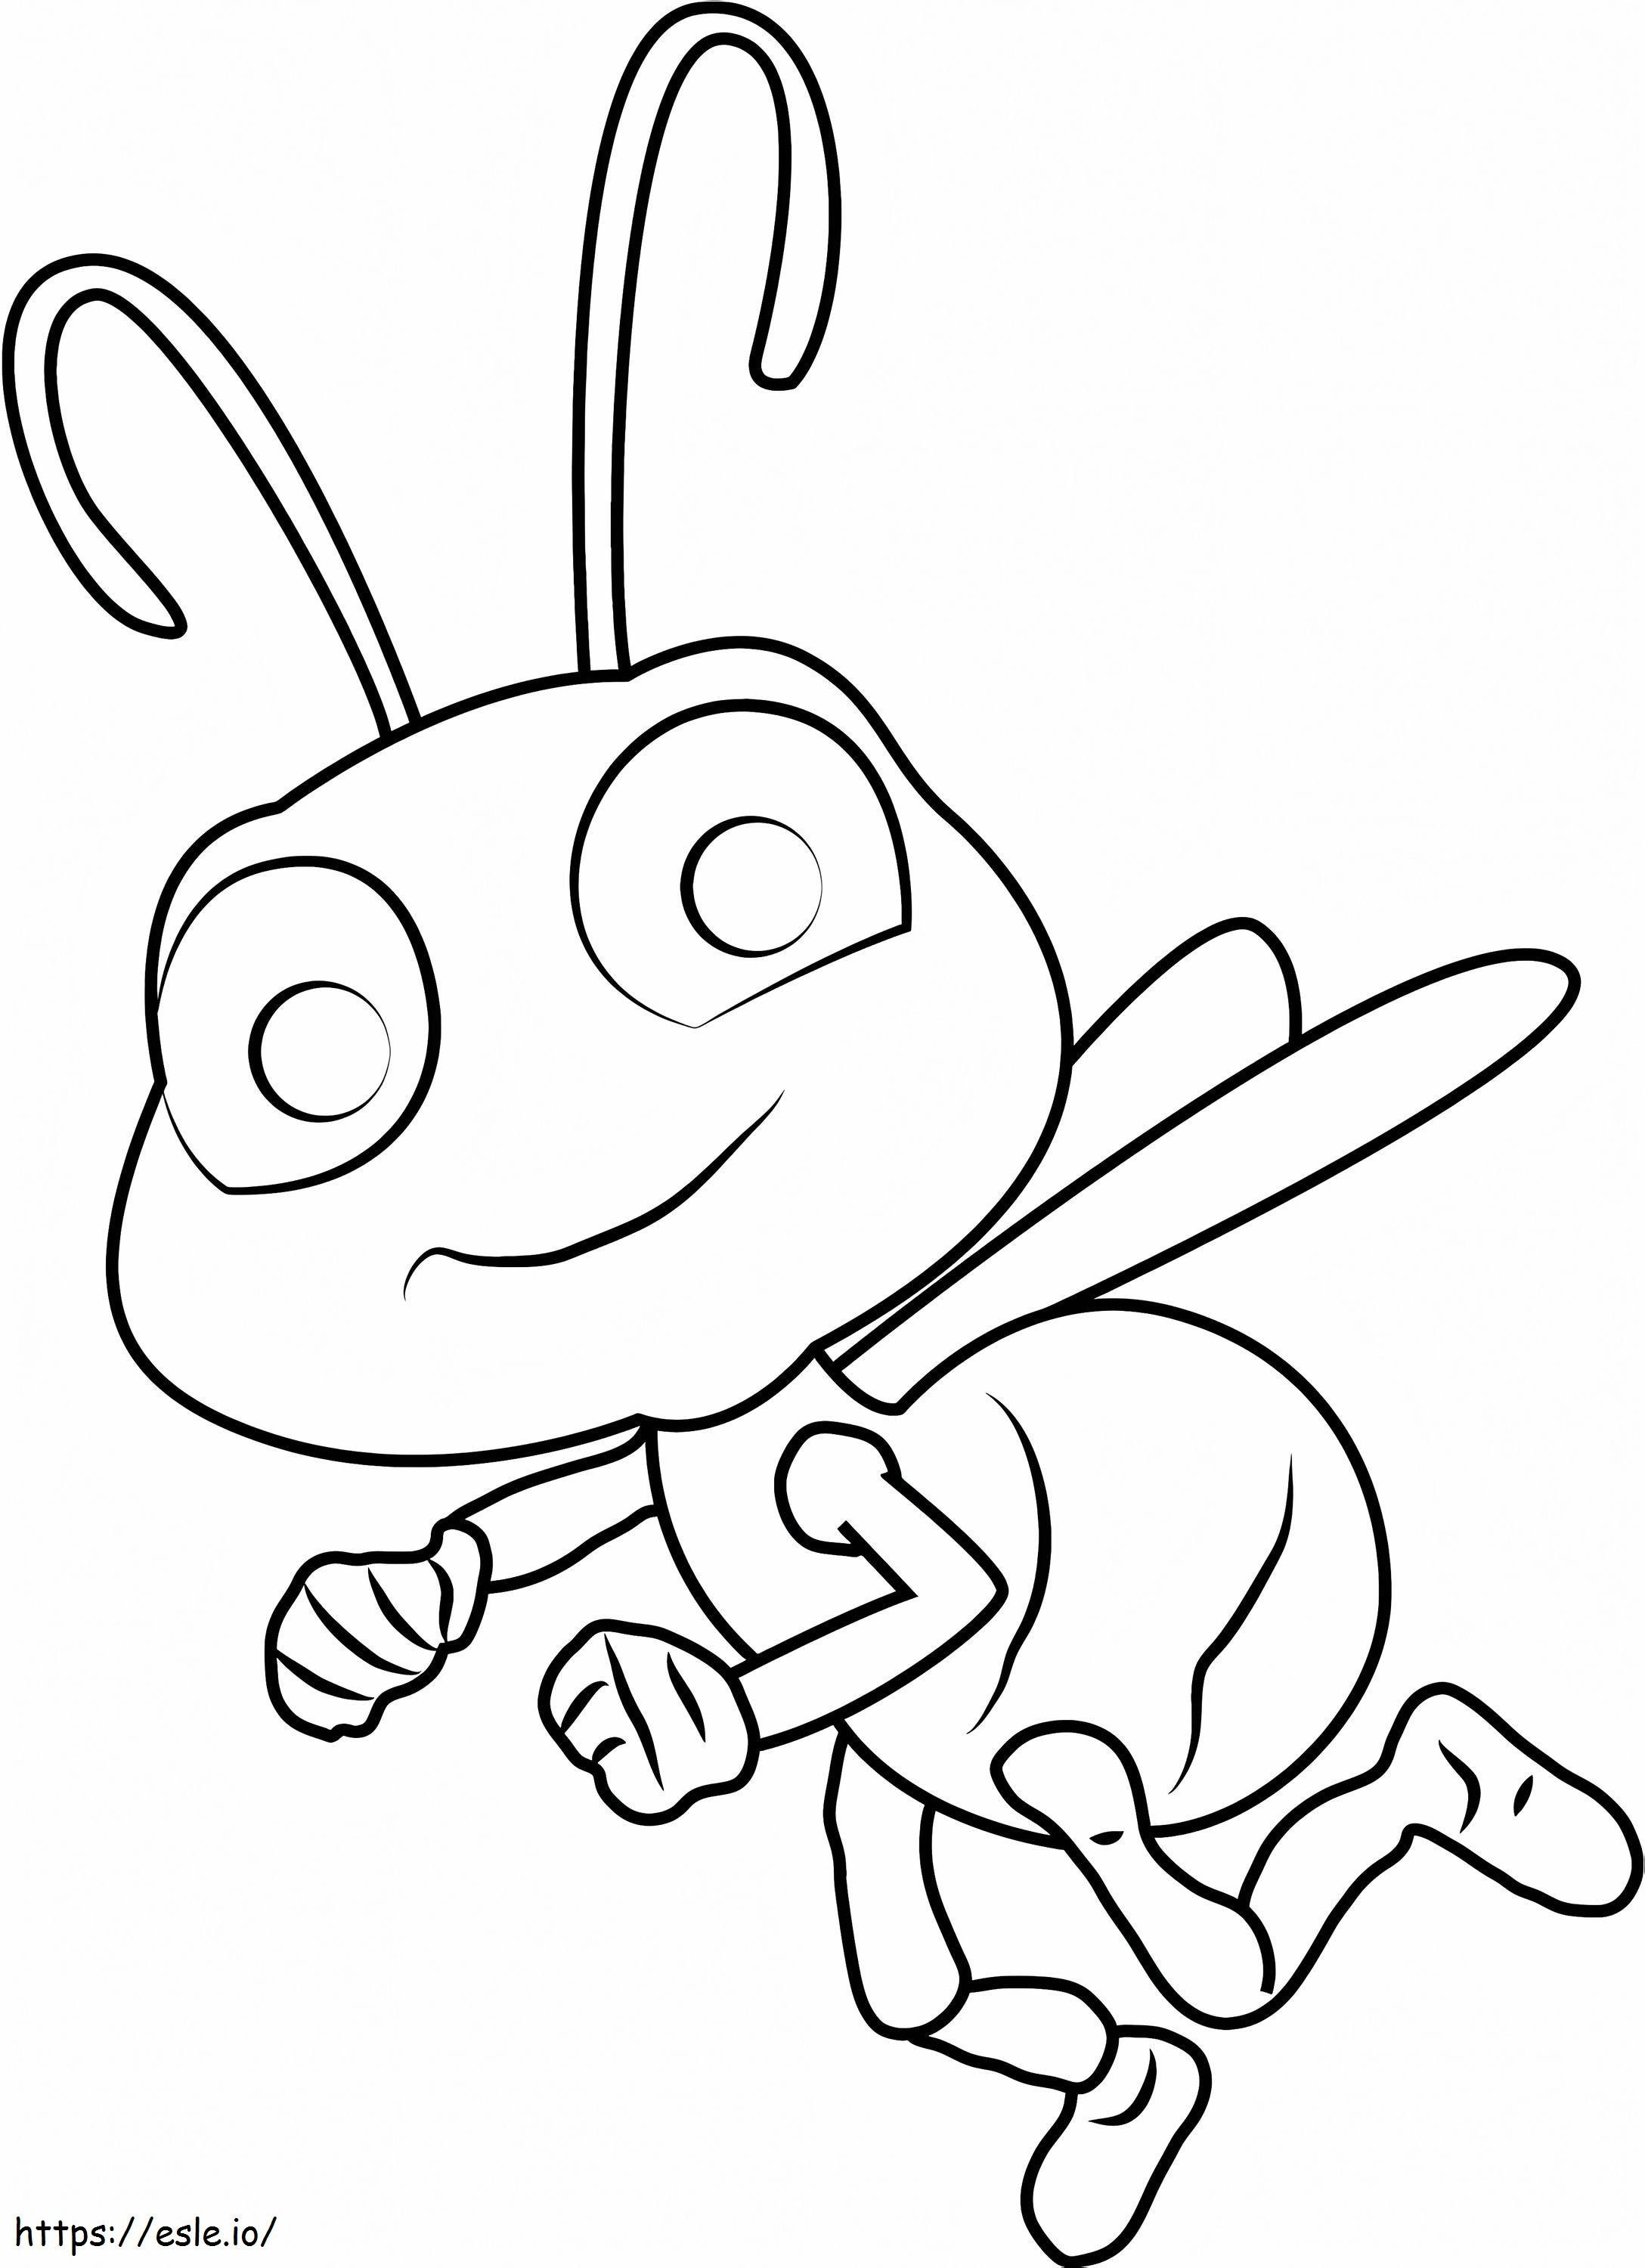 Dot Flying A4 coloring page